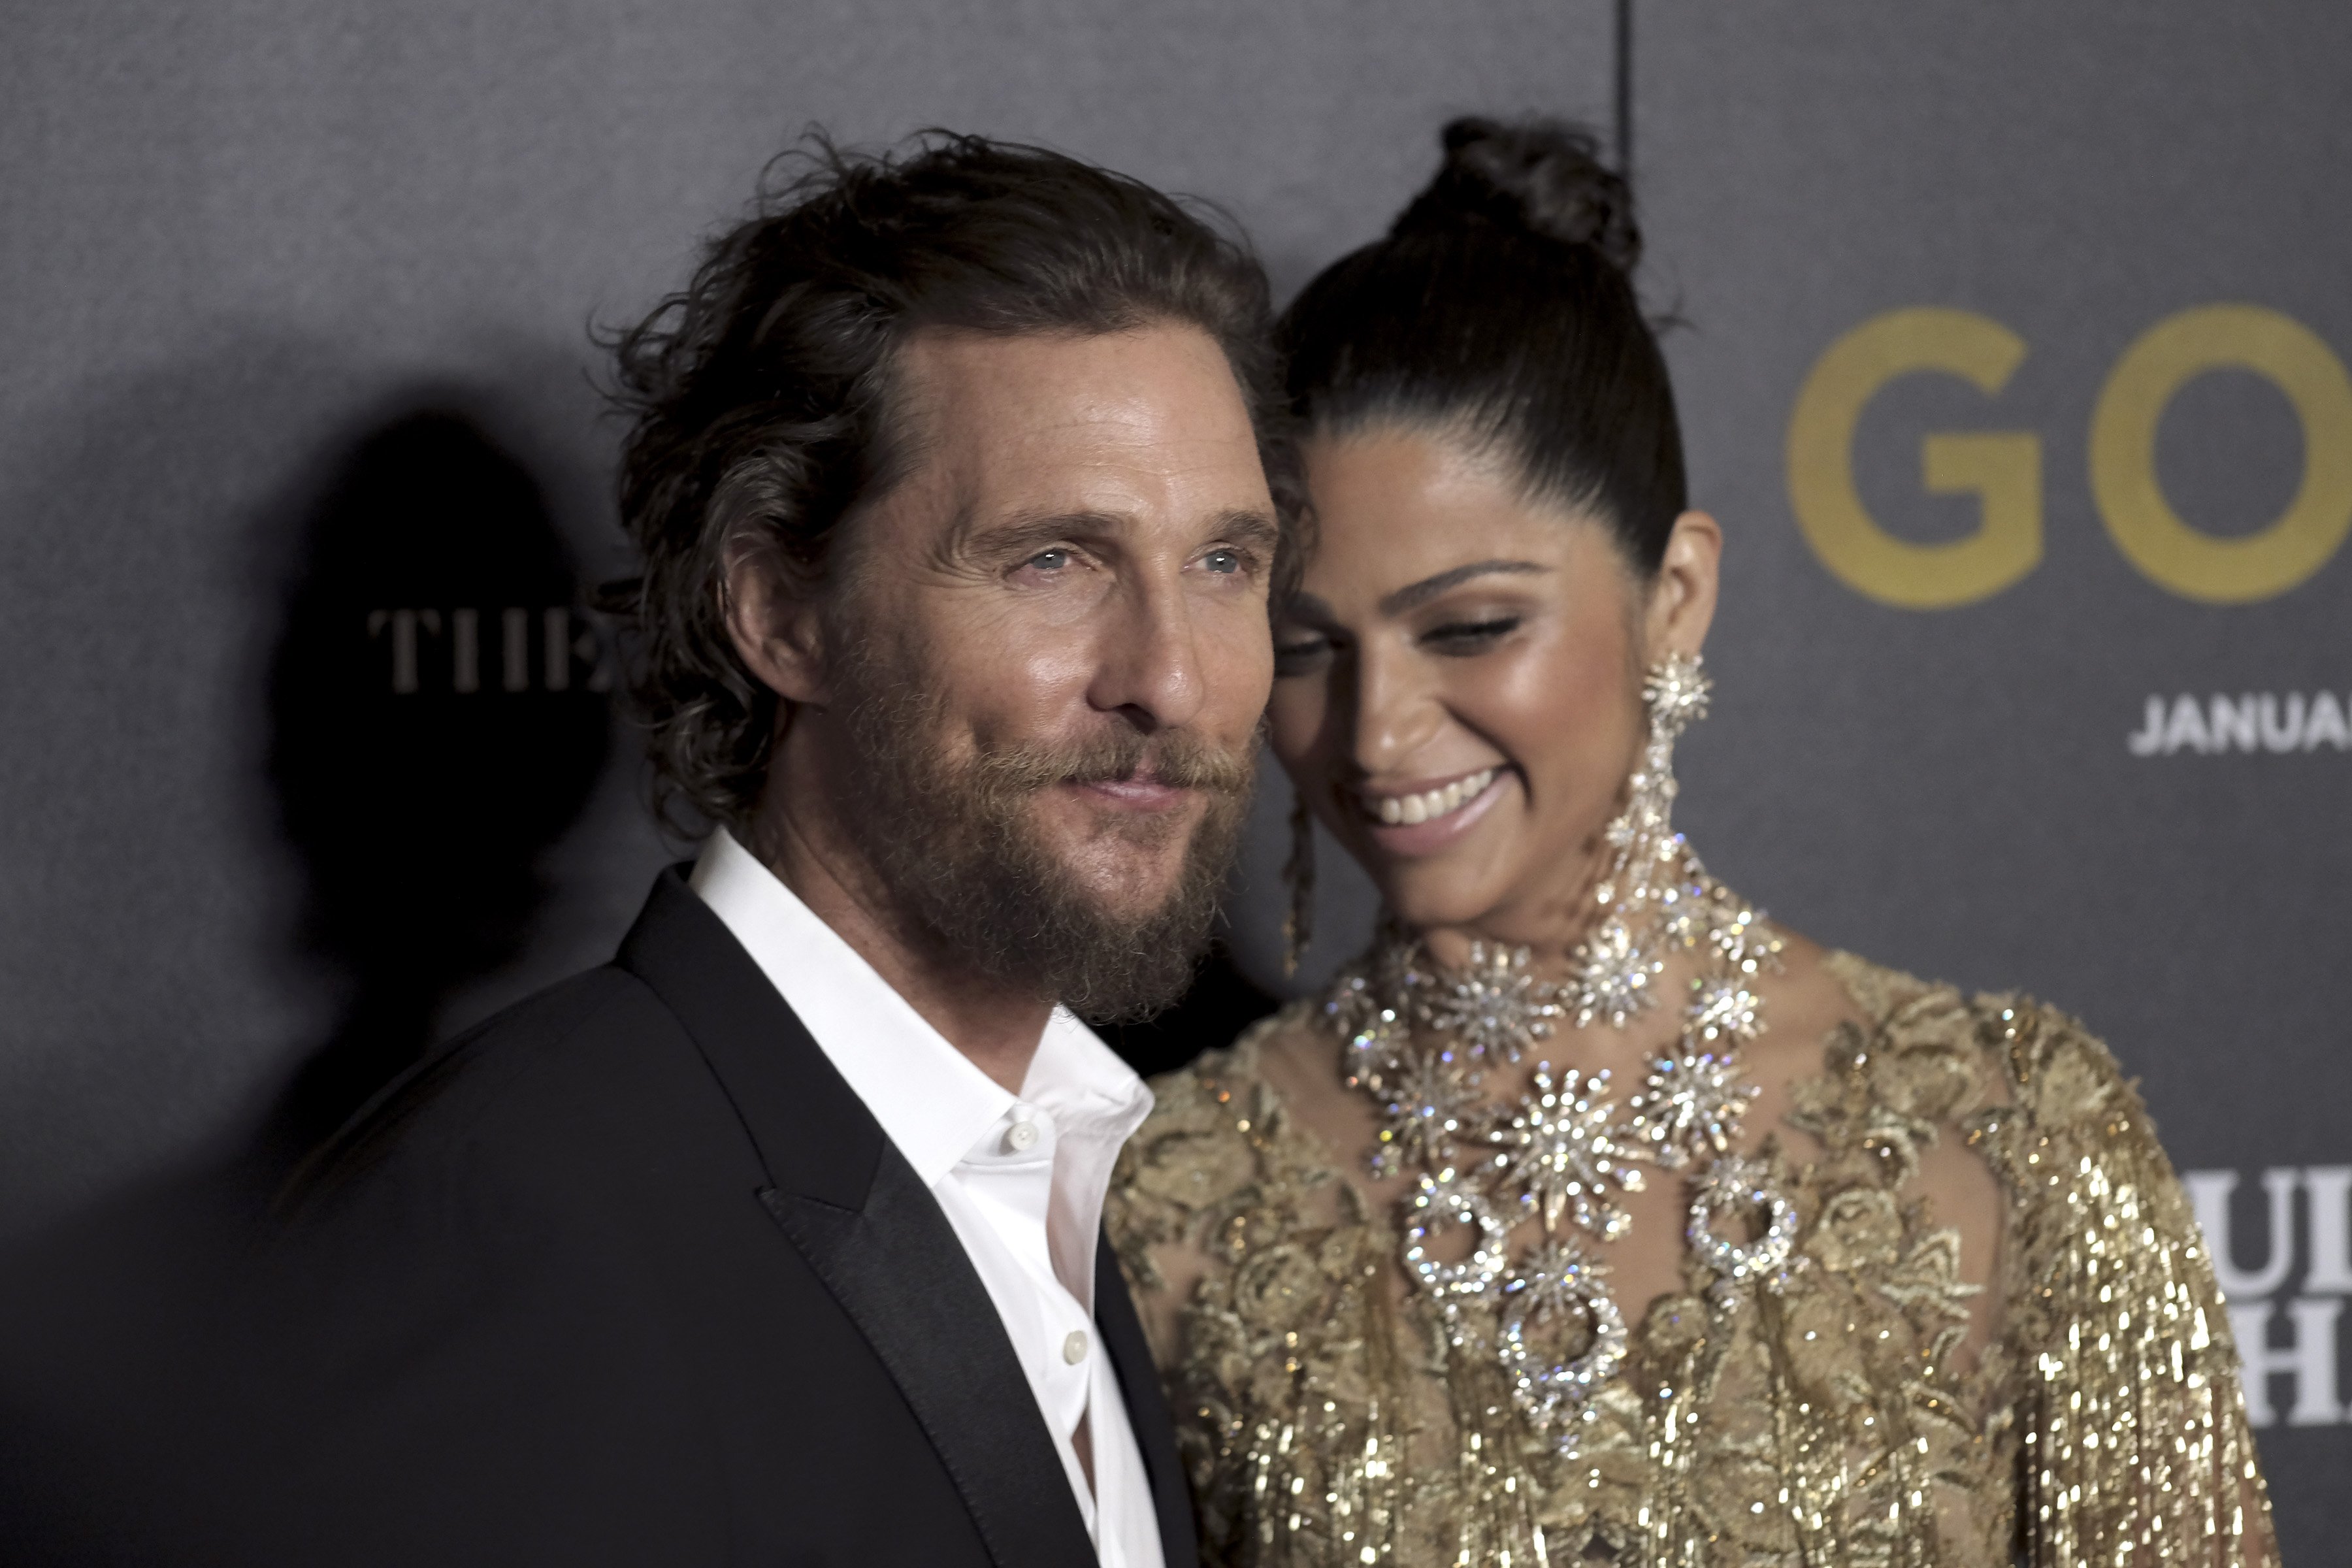 Matthew McConaughey and Camila Alves at The World Premiere of "Gold" on January 17, 2017 in New York City. | Source: Getty Images